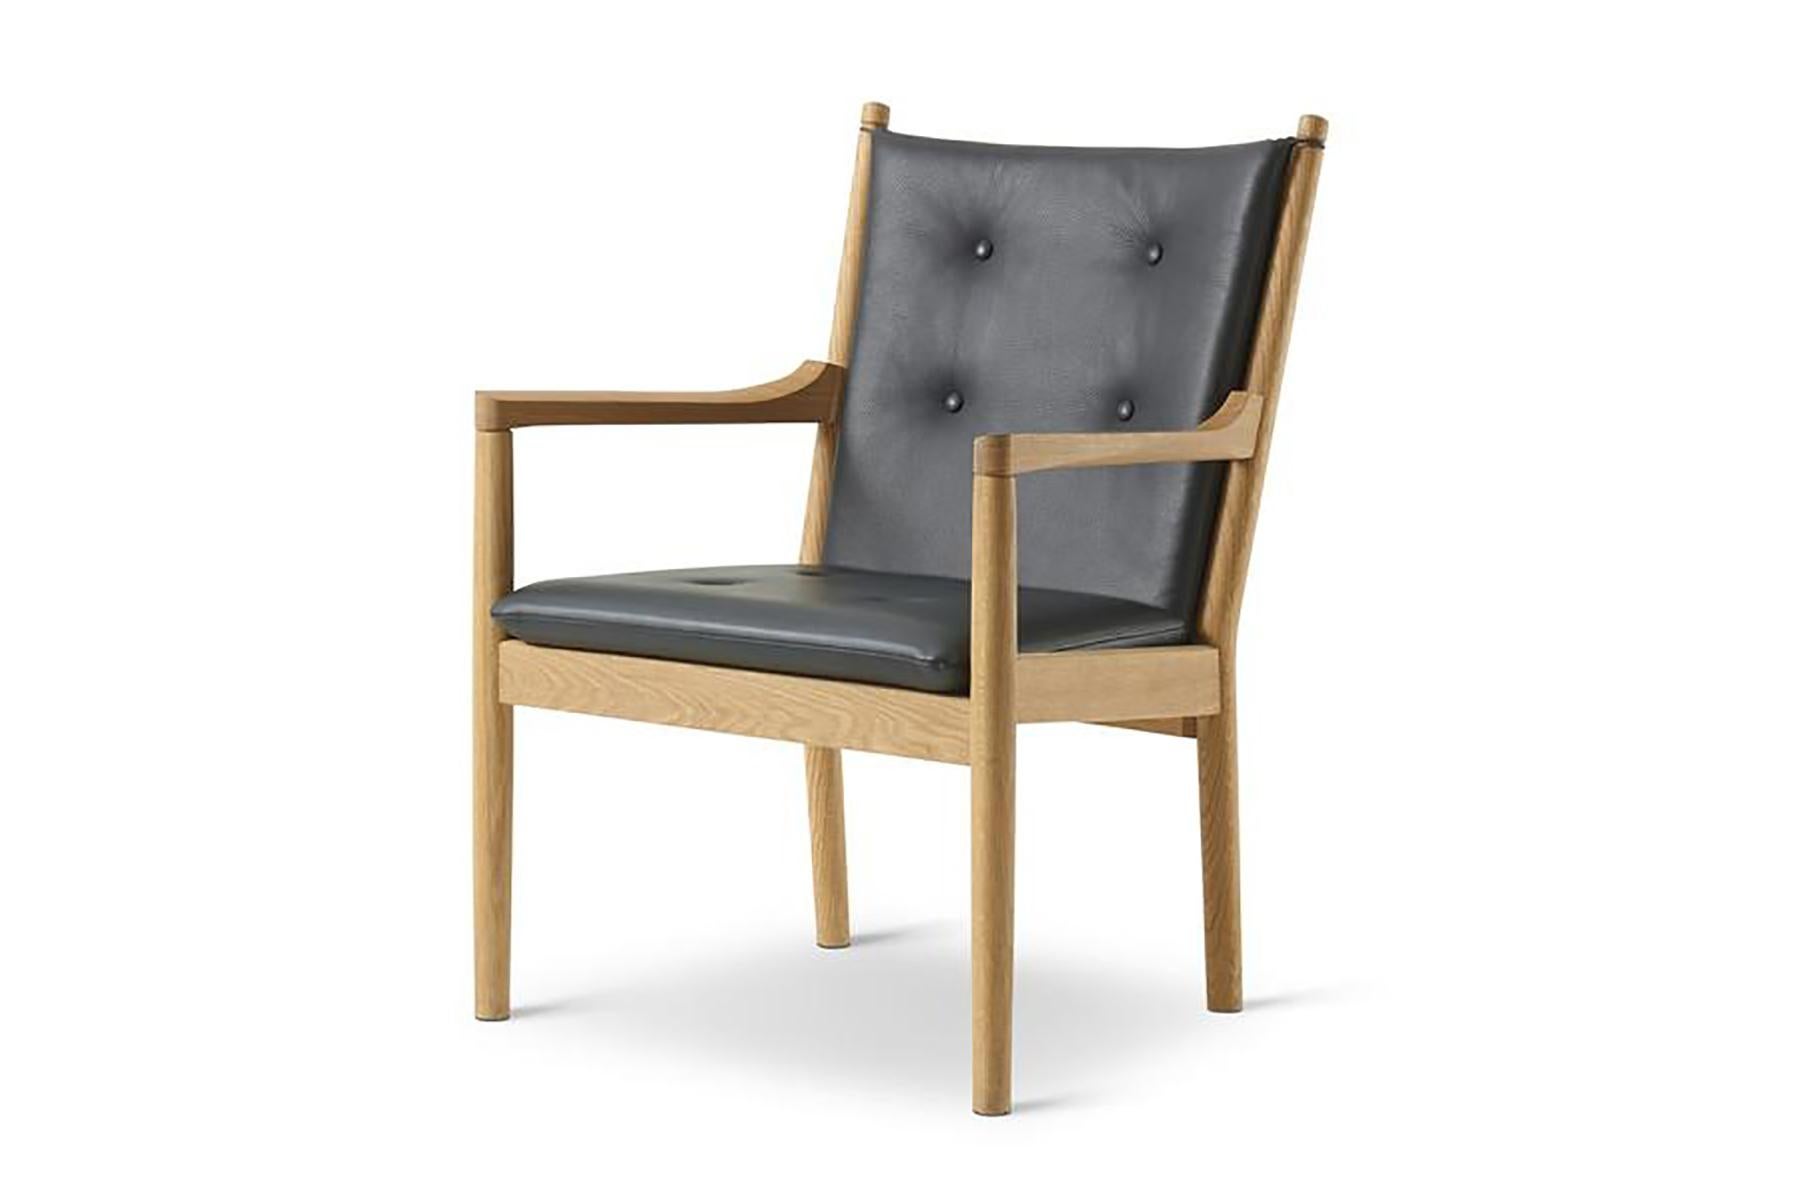 Hans Wegner designed the sophisticated 1788 armchair in 1963. The lightweight wooden design with interchangeable cushions is ideal for both exclusive public spaces and private homes.

  